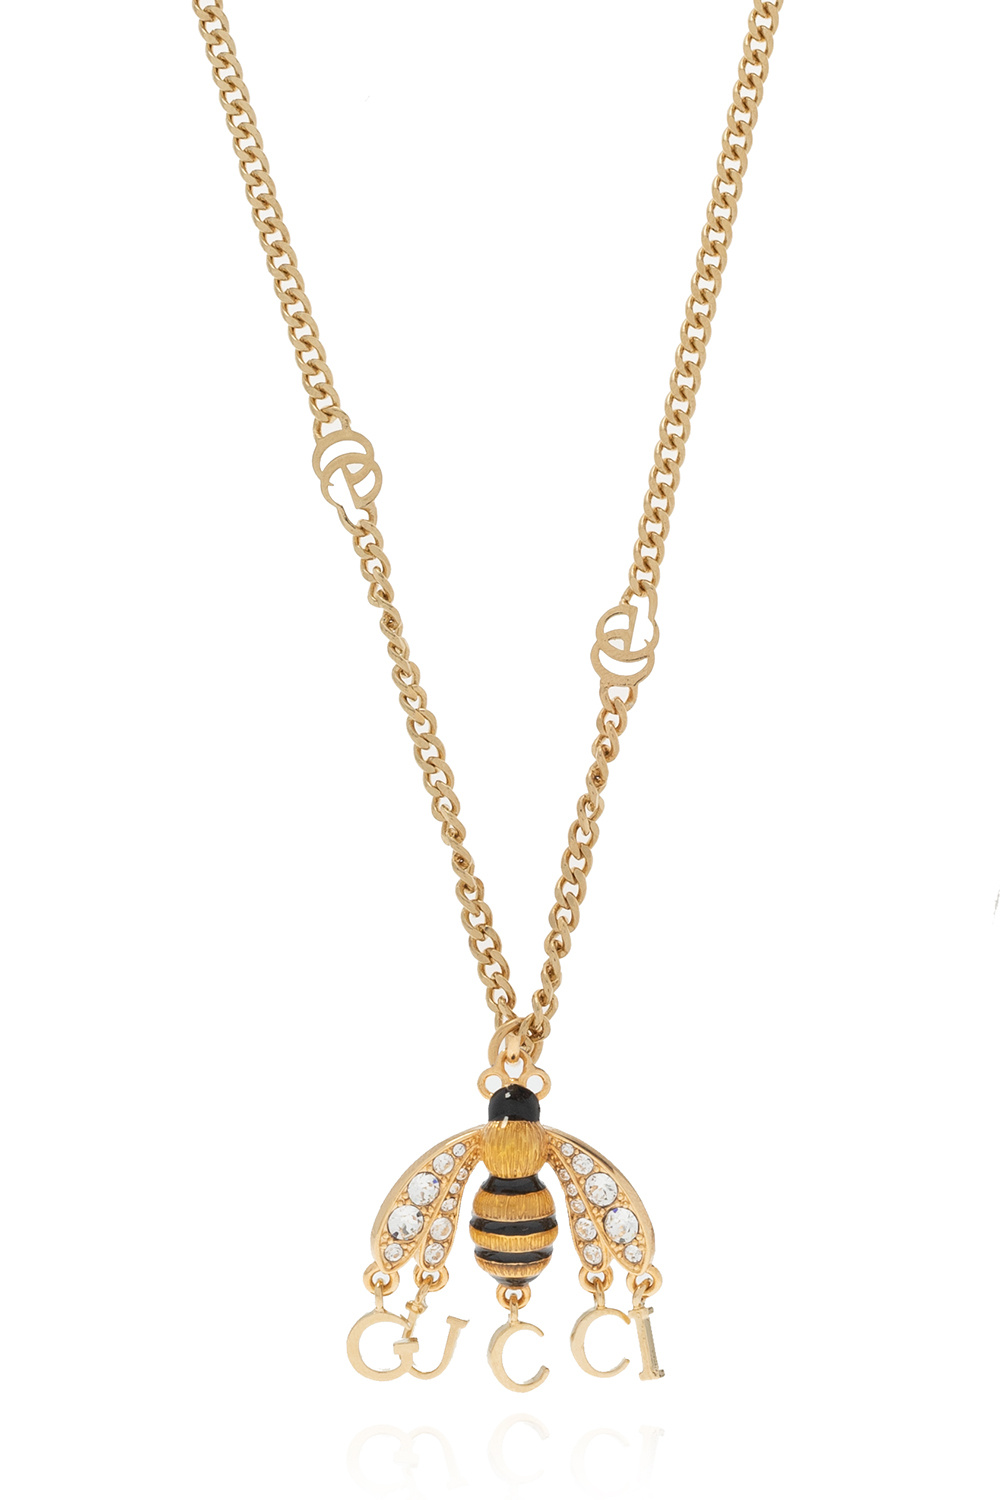 Gucci Bee necklace